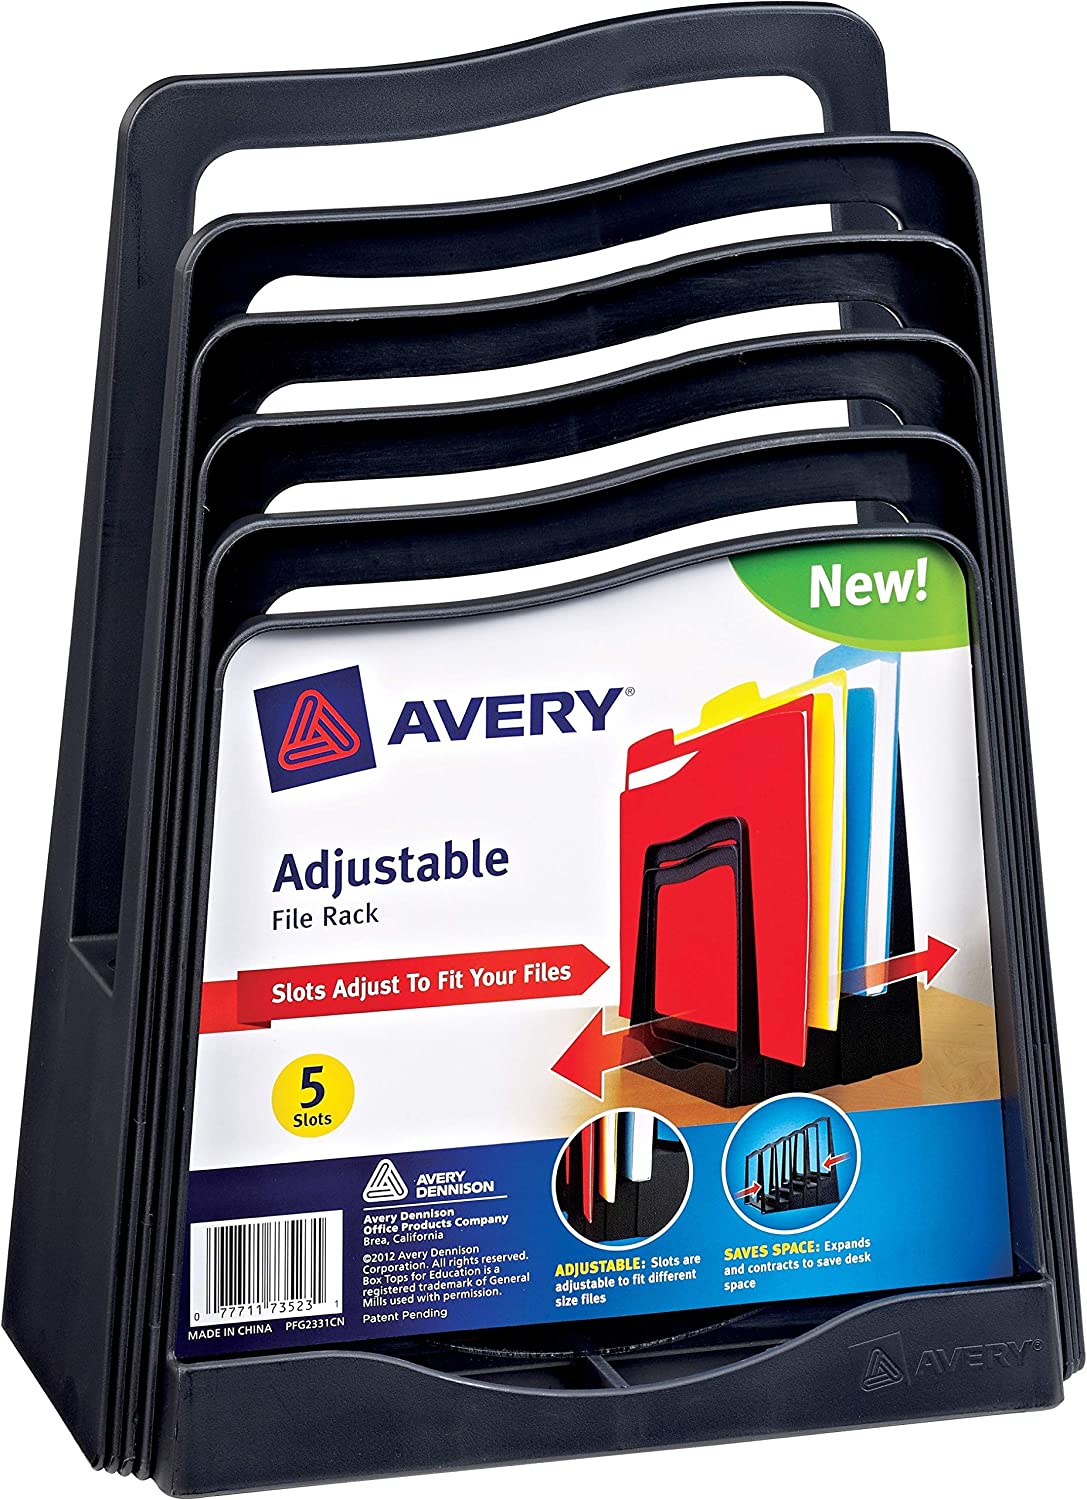 Avery 73523 Adjustable File Rack Five Sections 8 x 10 1/2 x 11 1/2 Black